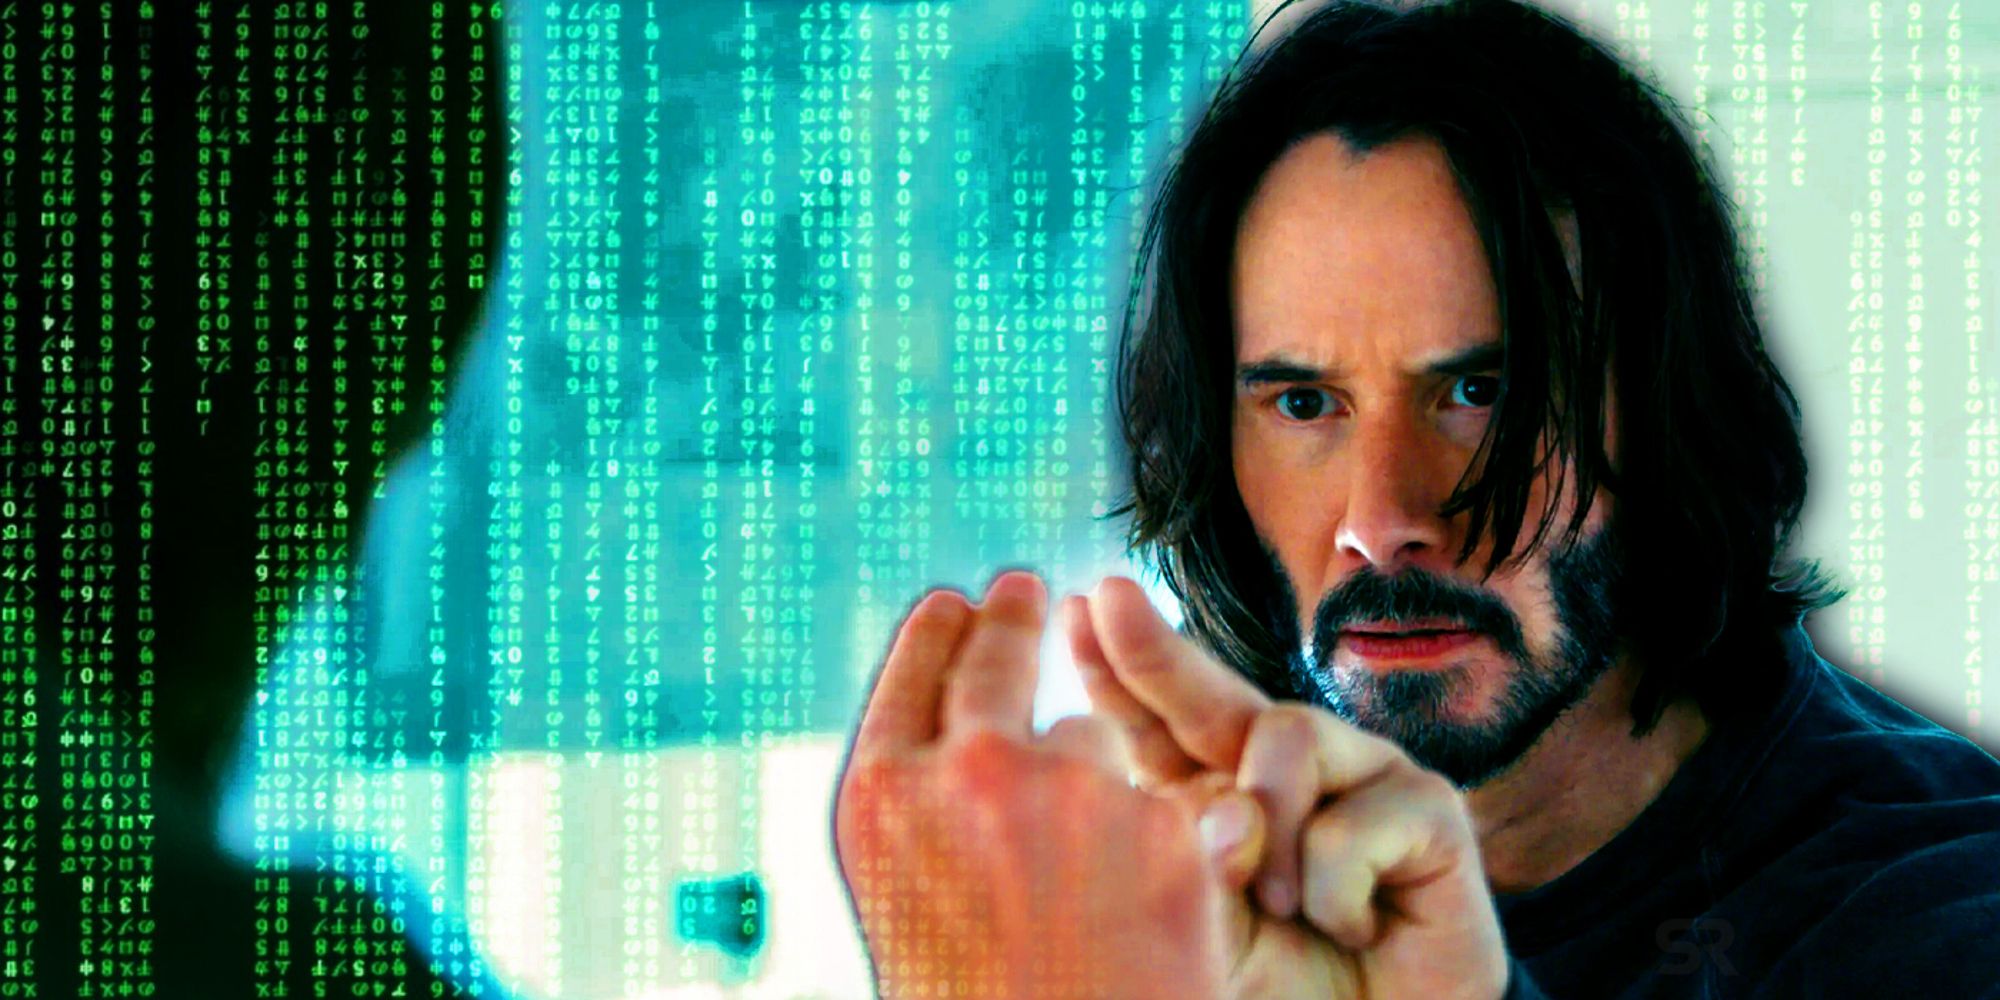 Neo (Keanu Reeves) looking at Matrix code in the mirror in The Matrix Resurrections